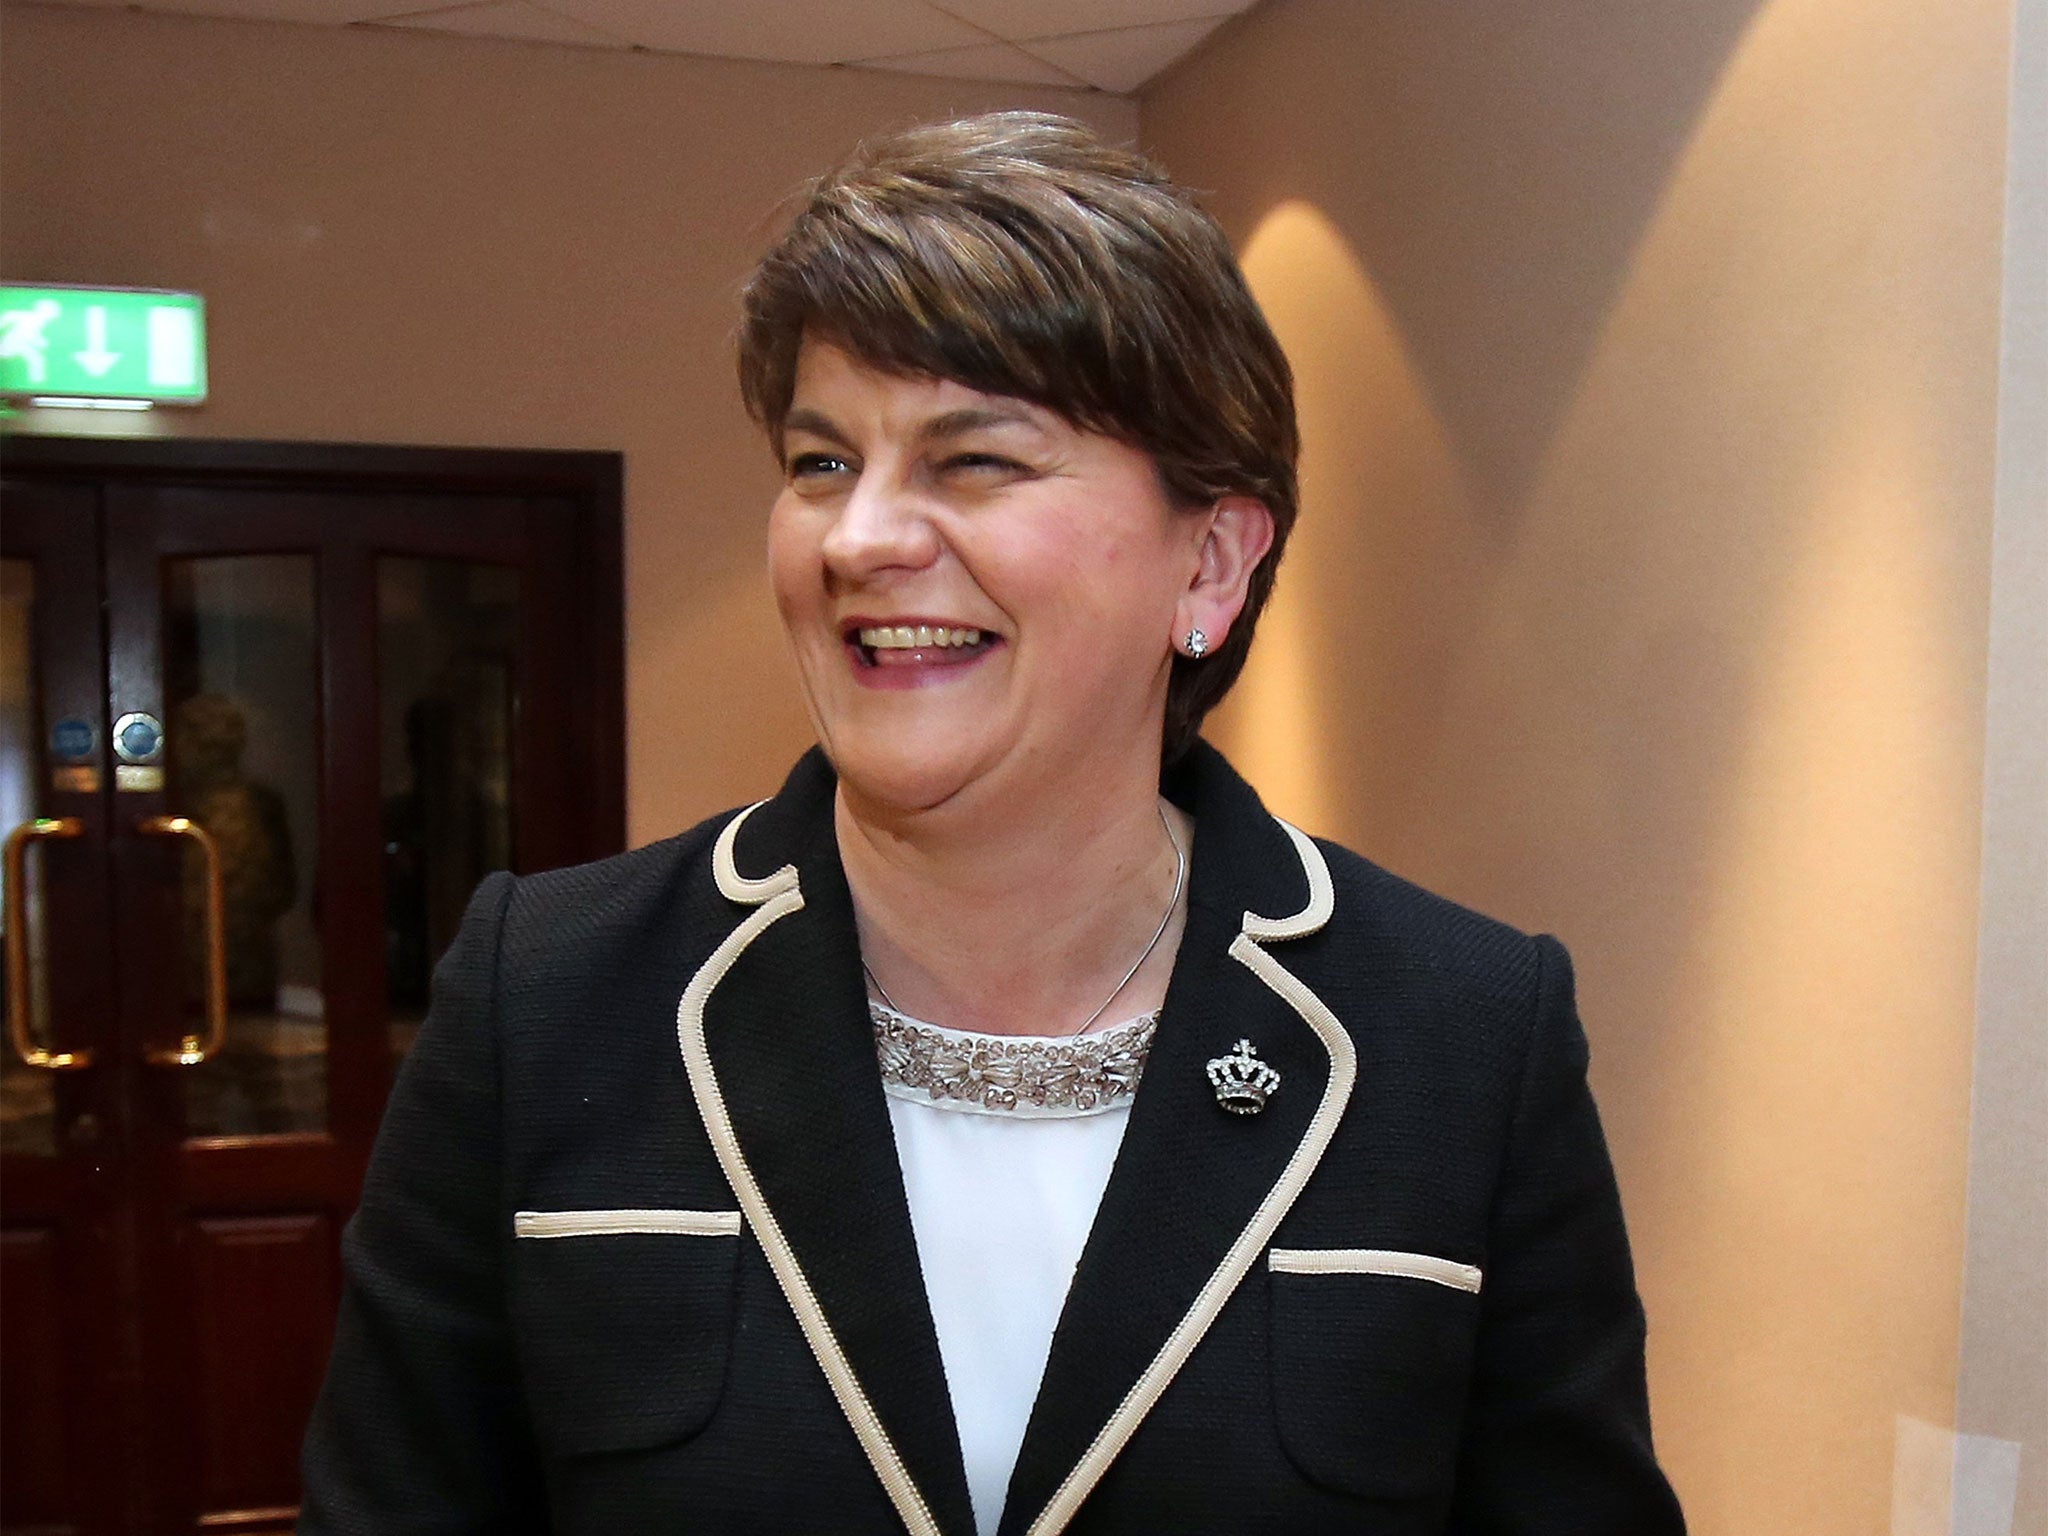 Arlene Foster recently became the first woman to be Northern Irish First Minister when she replaced Peter Robinson